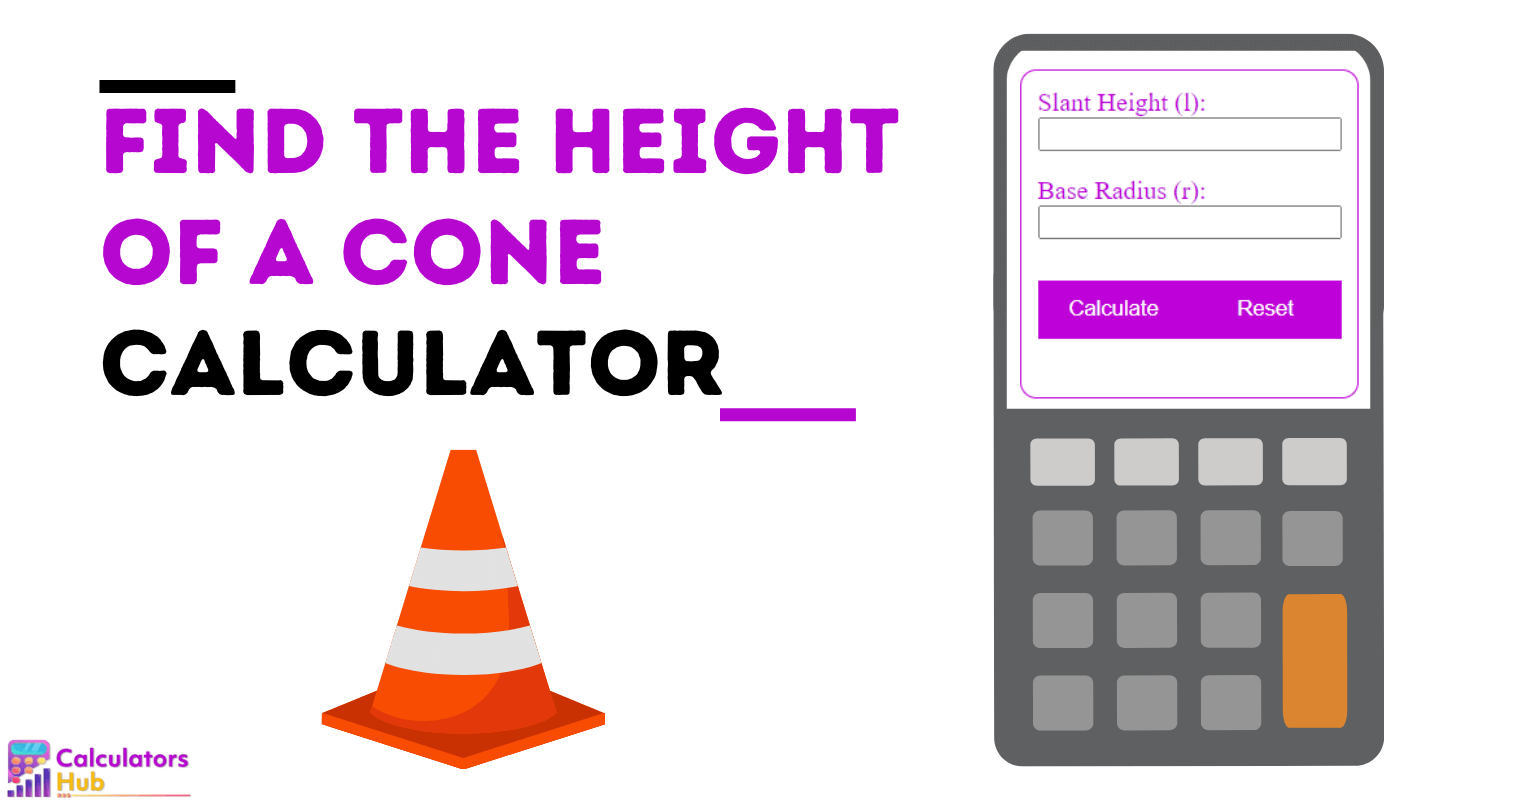 Find the Height of a Cone Calculator